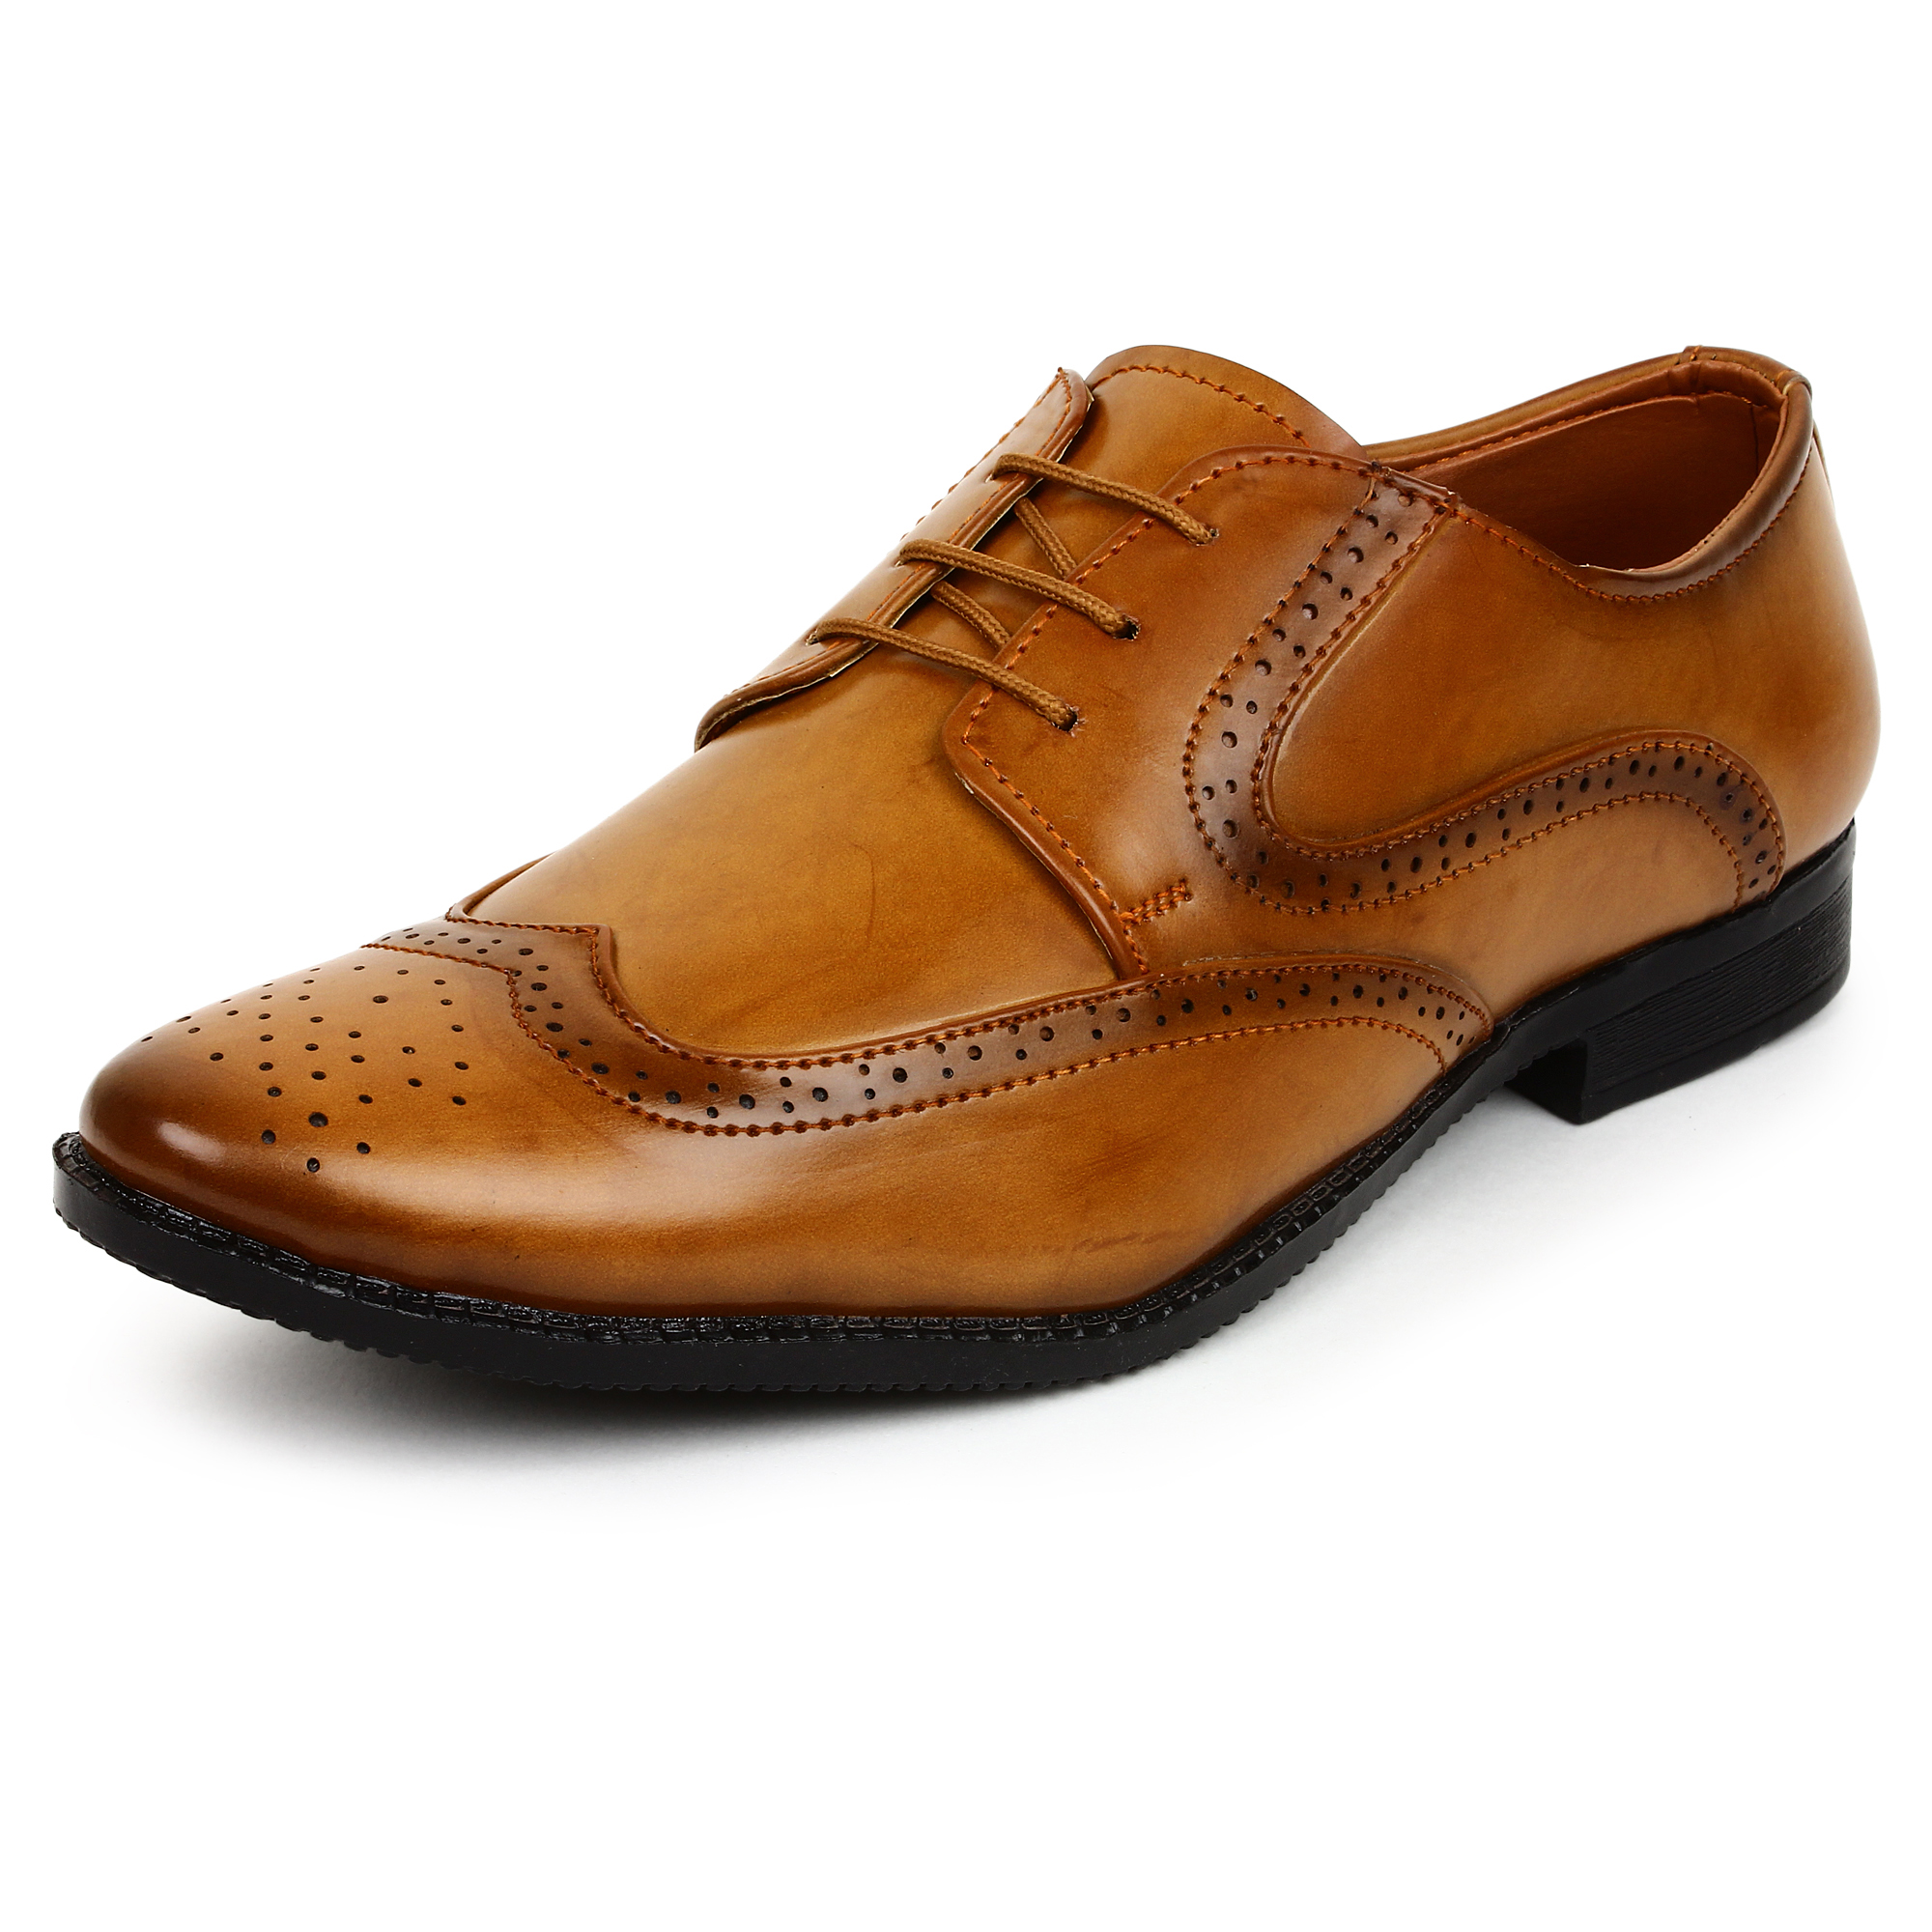 Buy Buwch formal brown shoe for menboys Online @ ₹499 from ShopClues